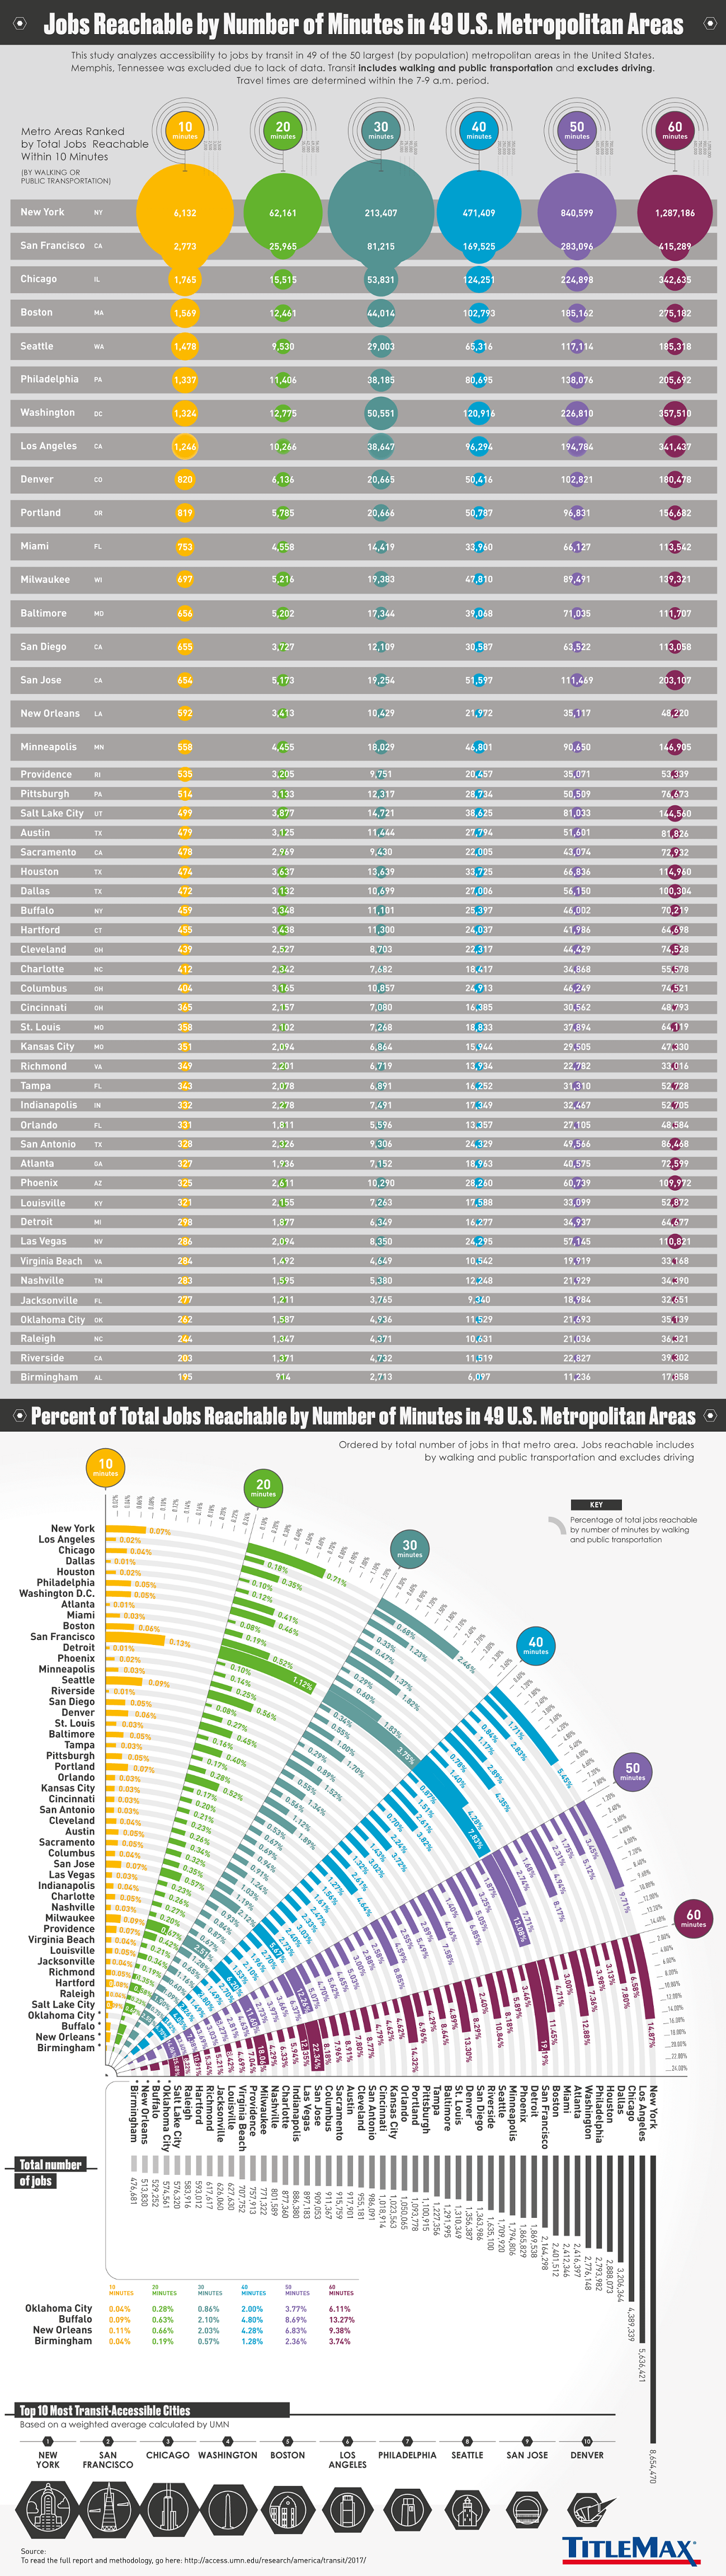 Jobs Reachable by Number of Minutes in 49 U.S. Metropolitan Areas #infographic